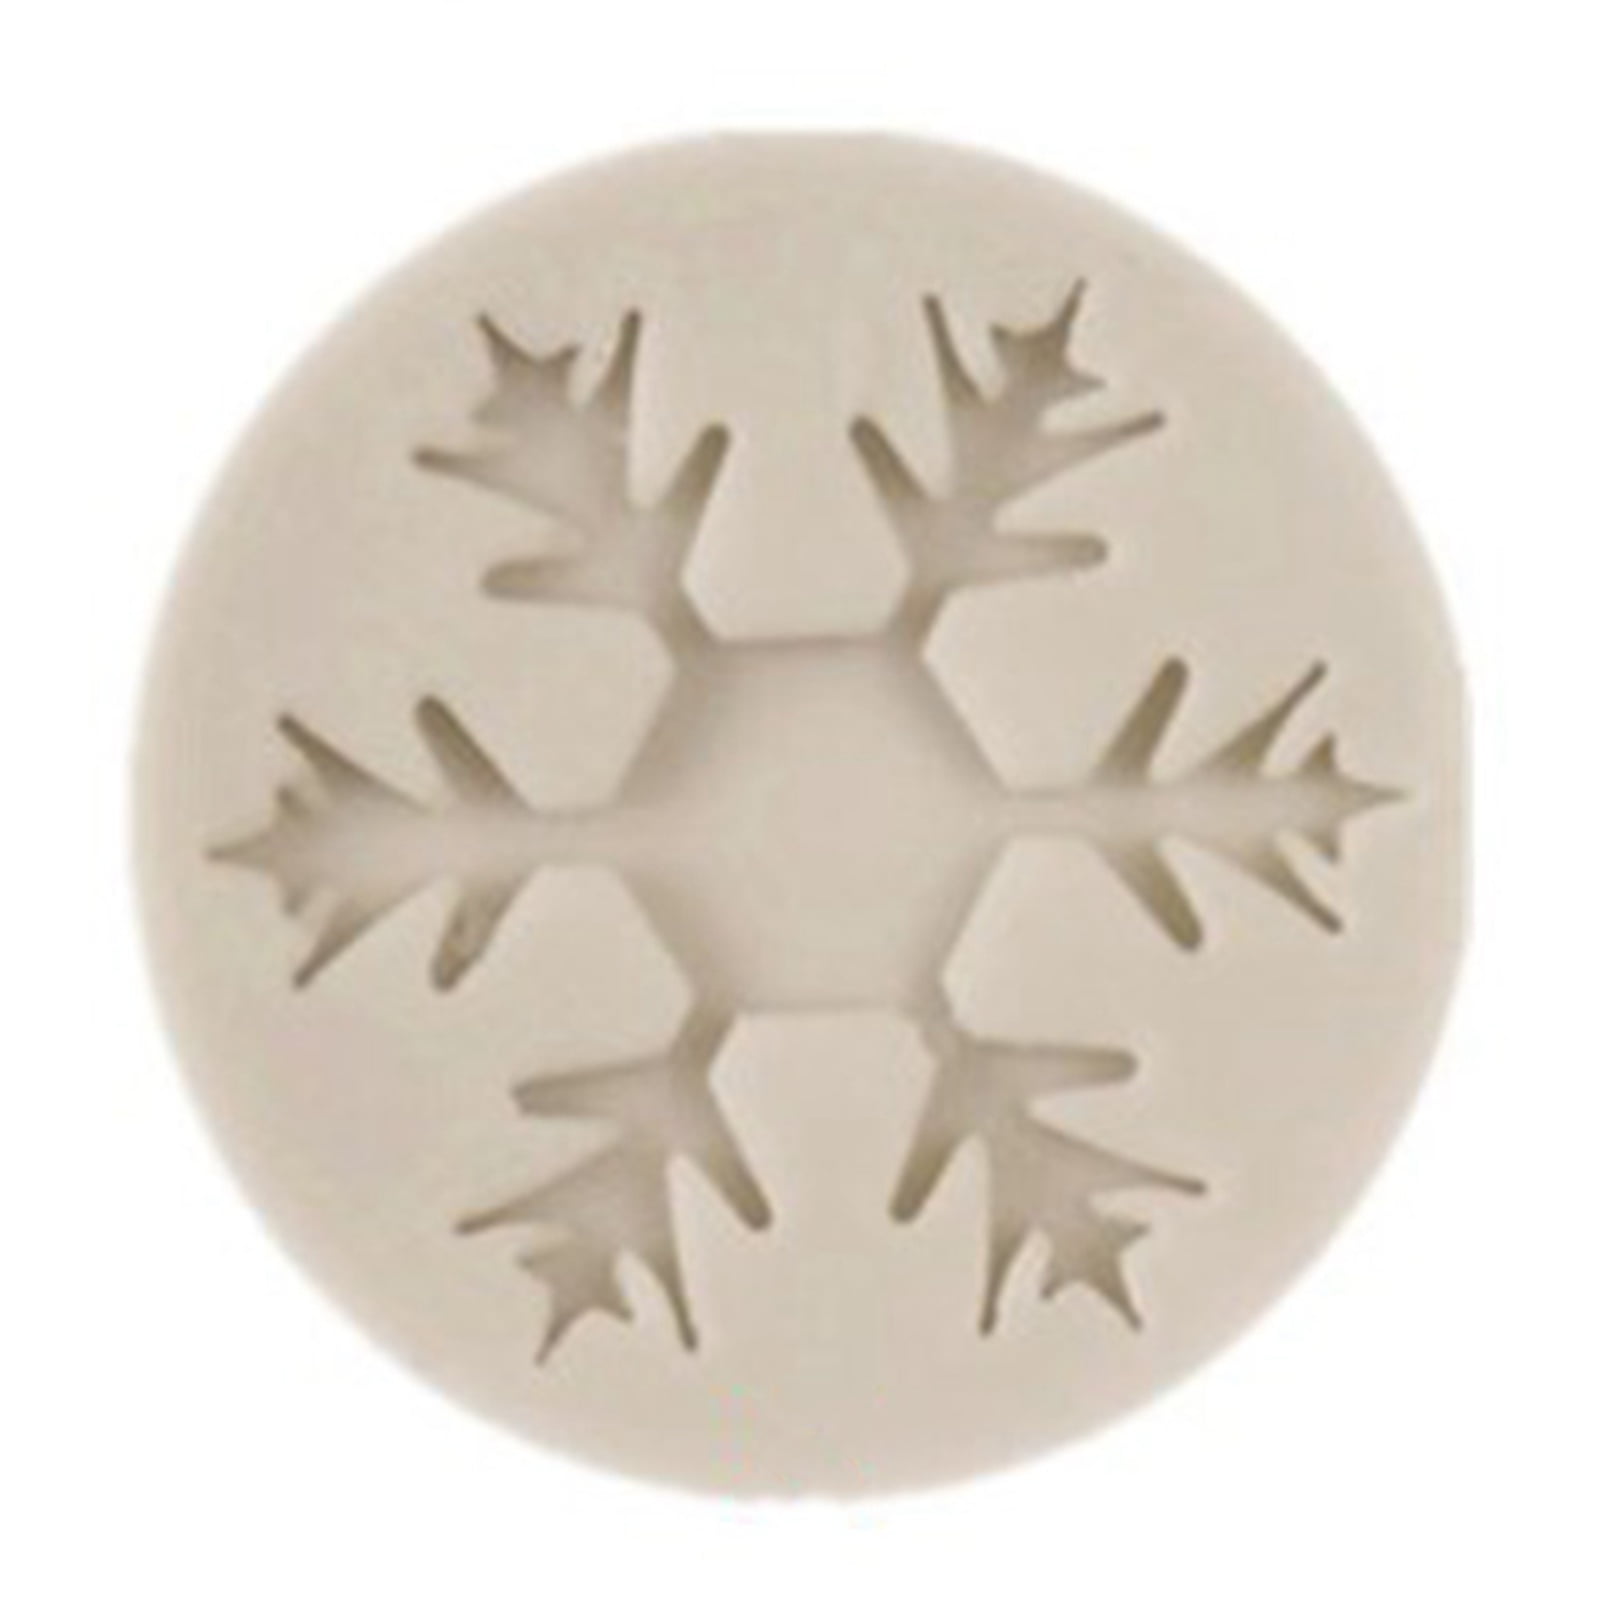 3D Snowflake Silicone Mold Christmas Party Decorations Fondant Cake Baking Tools